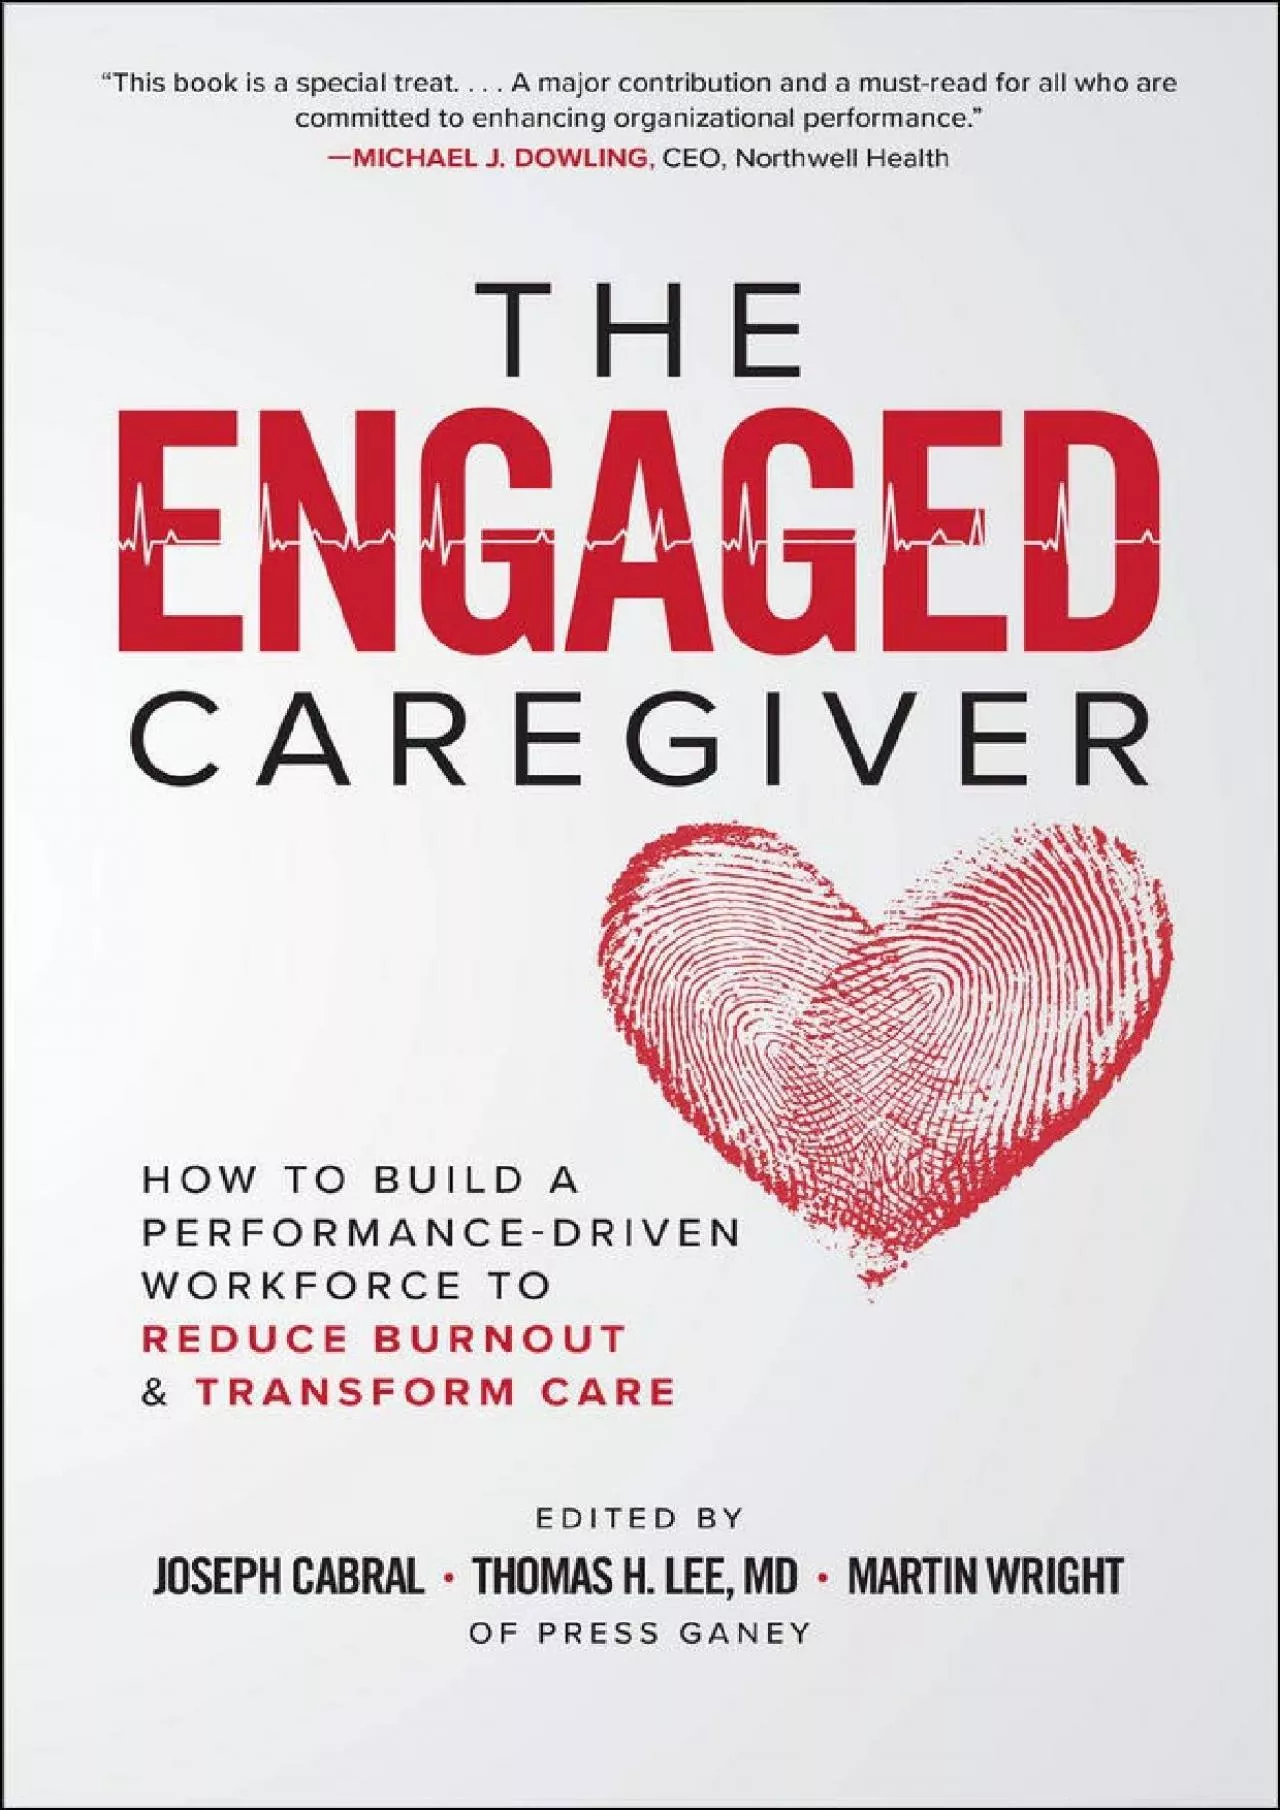 (DOWNLOAD)-The Engaged Caregiver: How to Build a Performance-Driven Workforce to Reduce